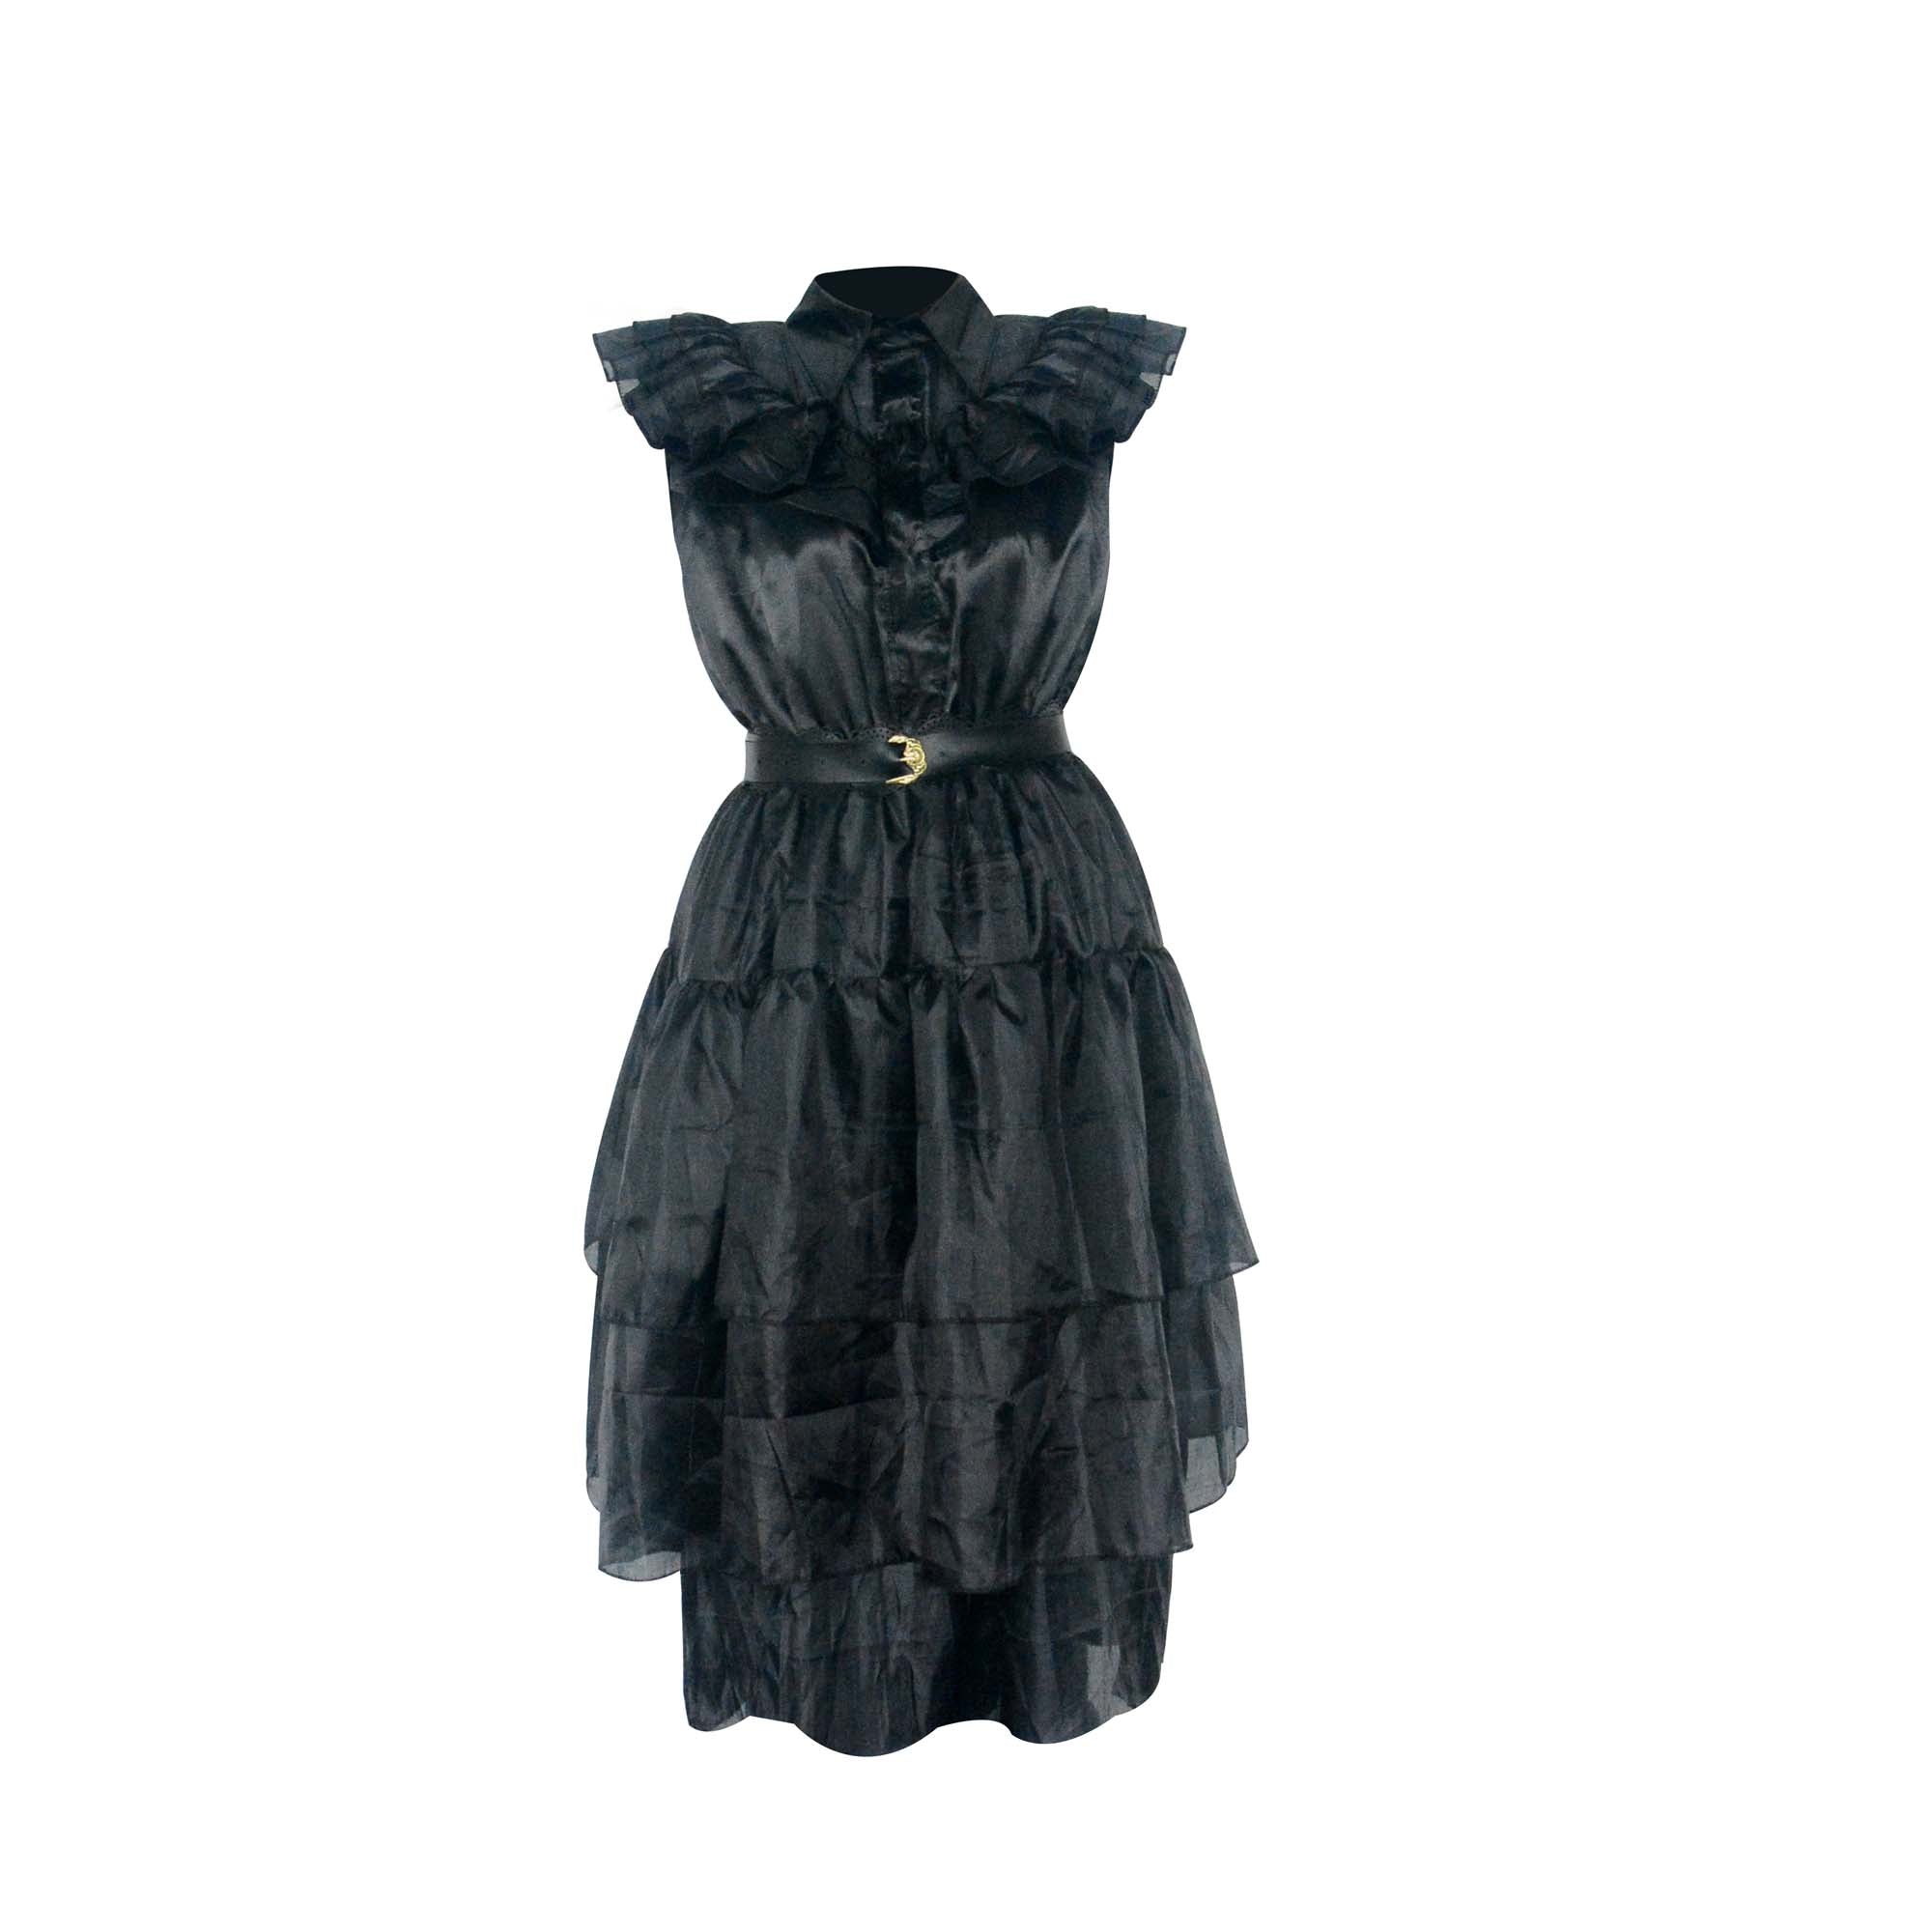 Gothic Party Dress Costume for Kids | Party Expert